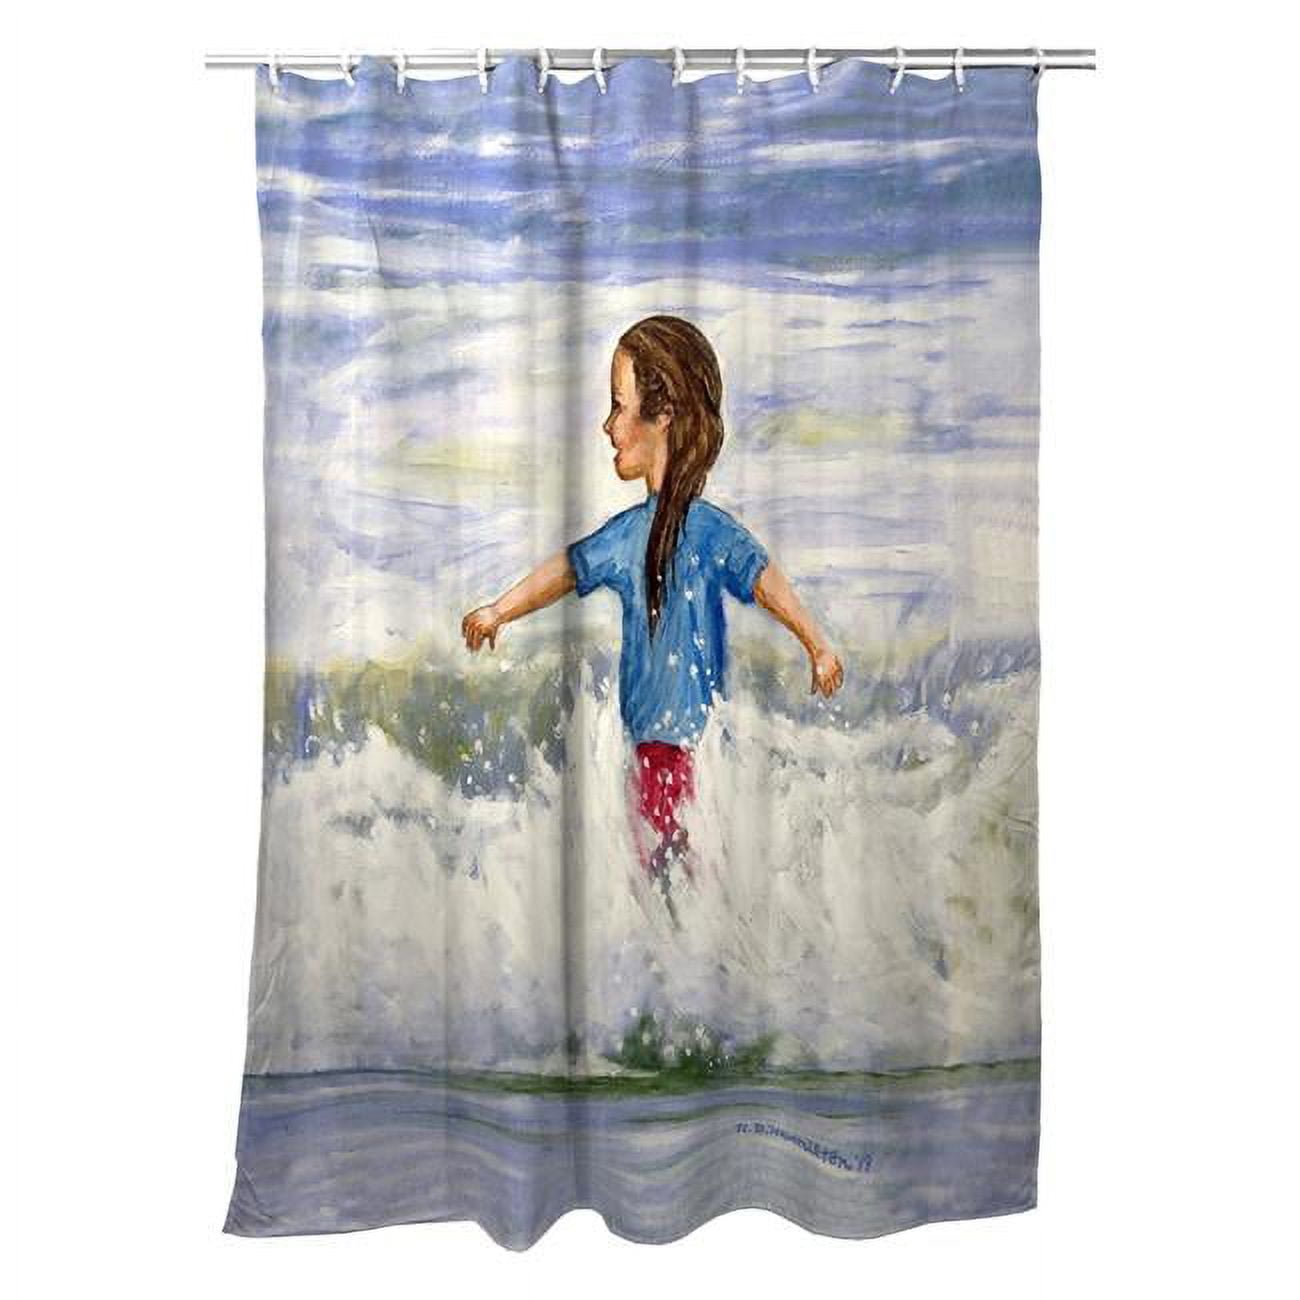 Picture of Betsydrake SH1156 71 x 74 in. Girl in Surf Shower Curtain